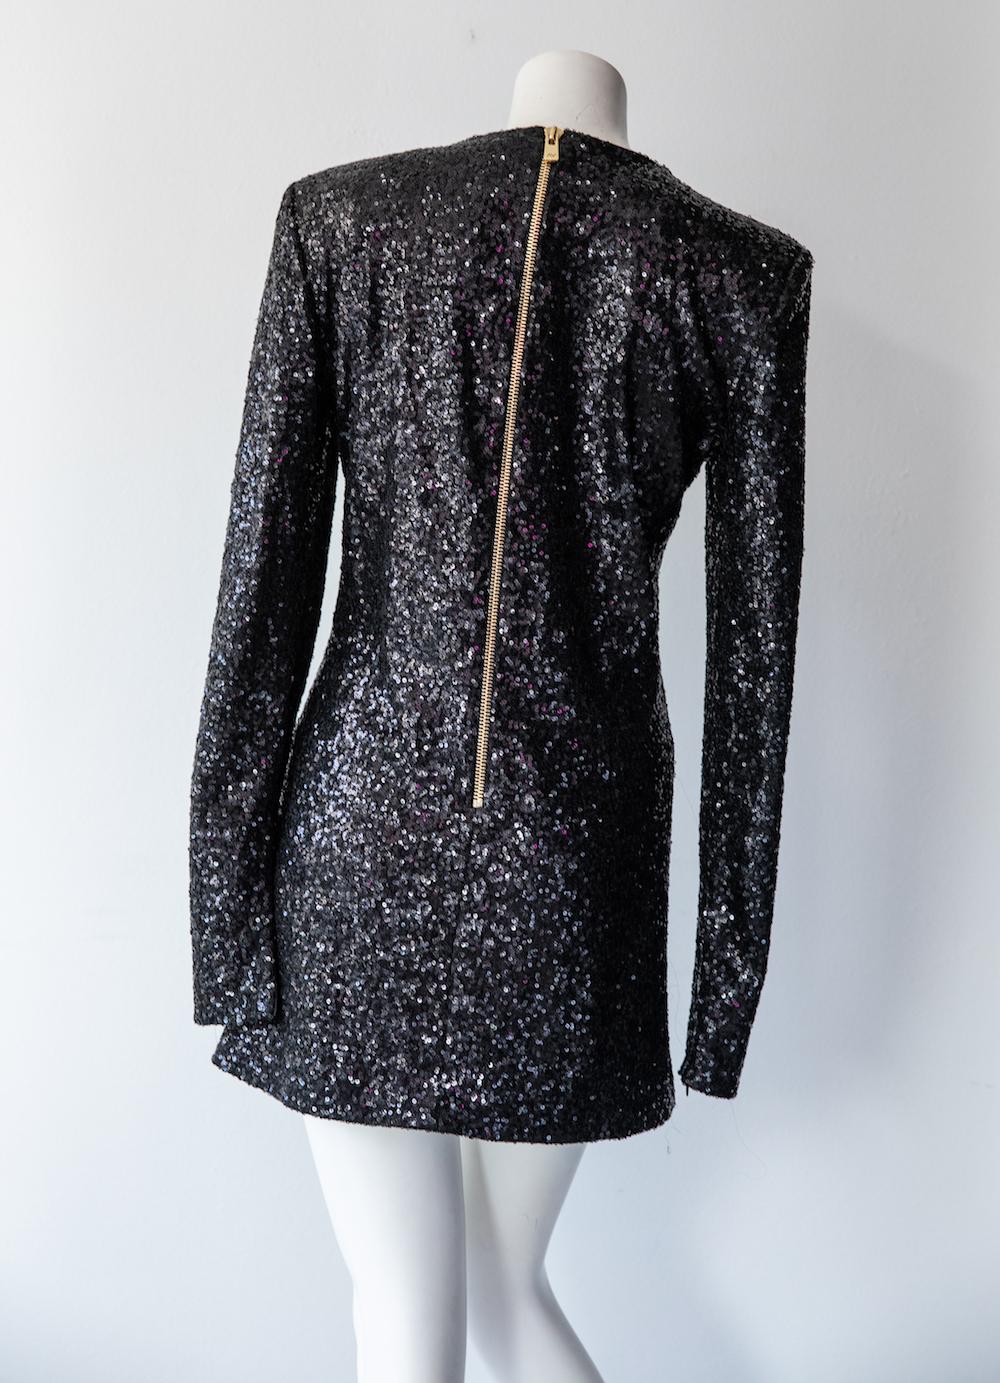 Long sleeve cocktail dress by designer Alexandre Vauthier for his namesake label. Vauthier designed this structured mini dress before beginning his tenure at Saint Laurent. It features a black mini-sequins all over, with a heavy gold exposed zipper